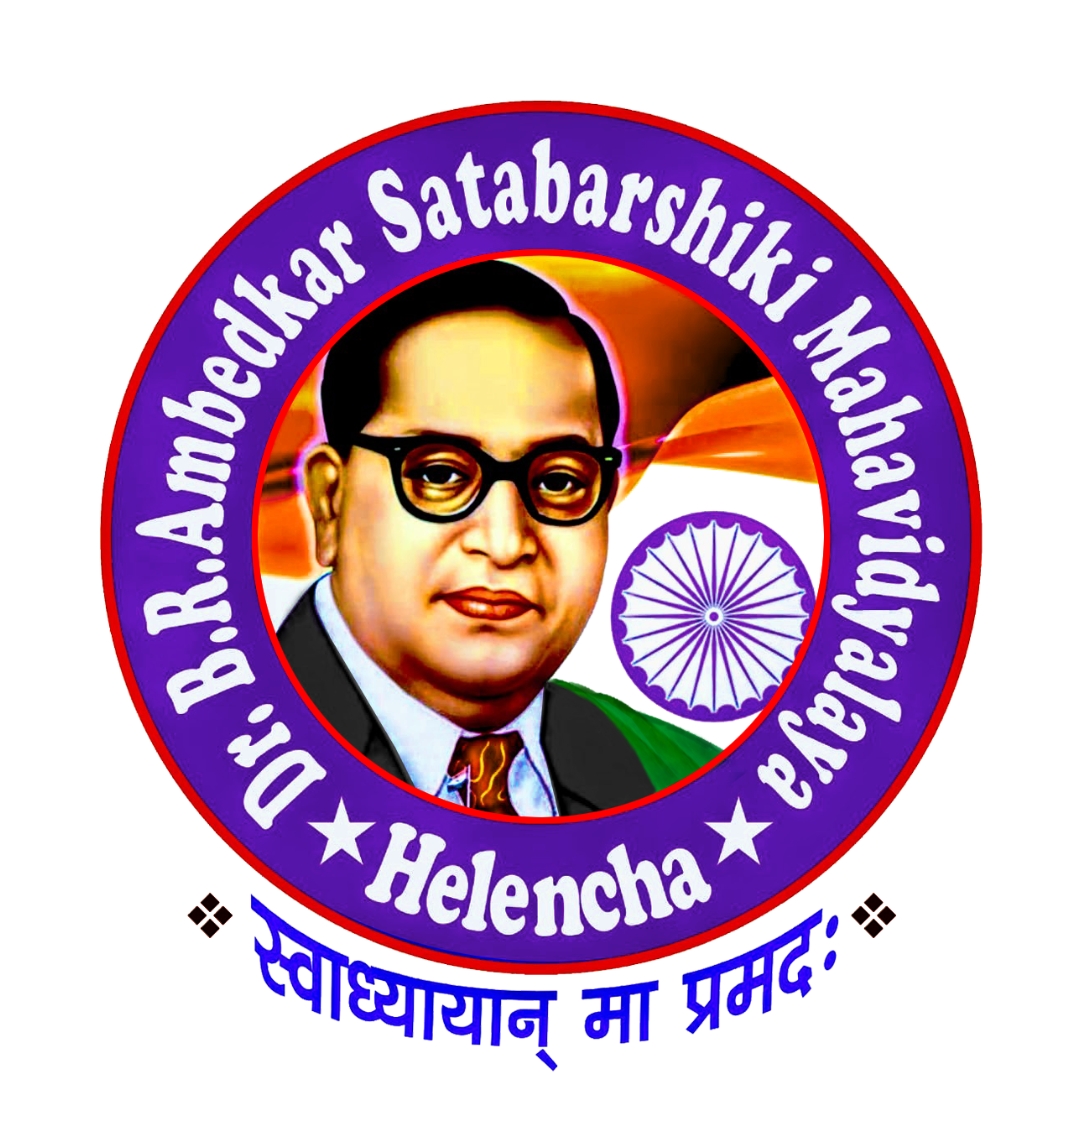 Dr Babasaheb Ambedkar College Of Science, Commerce &Management Vasai West